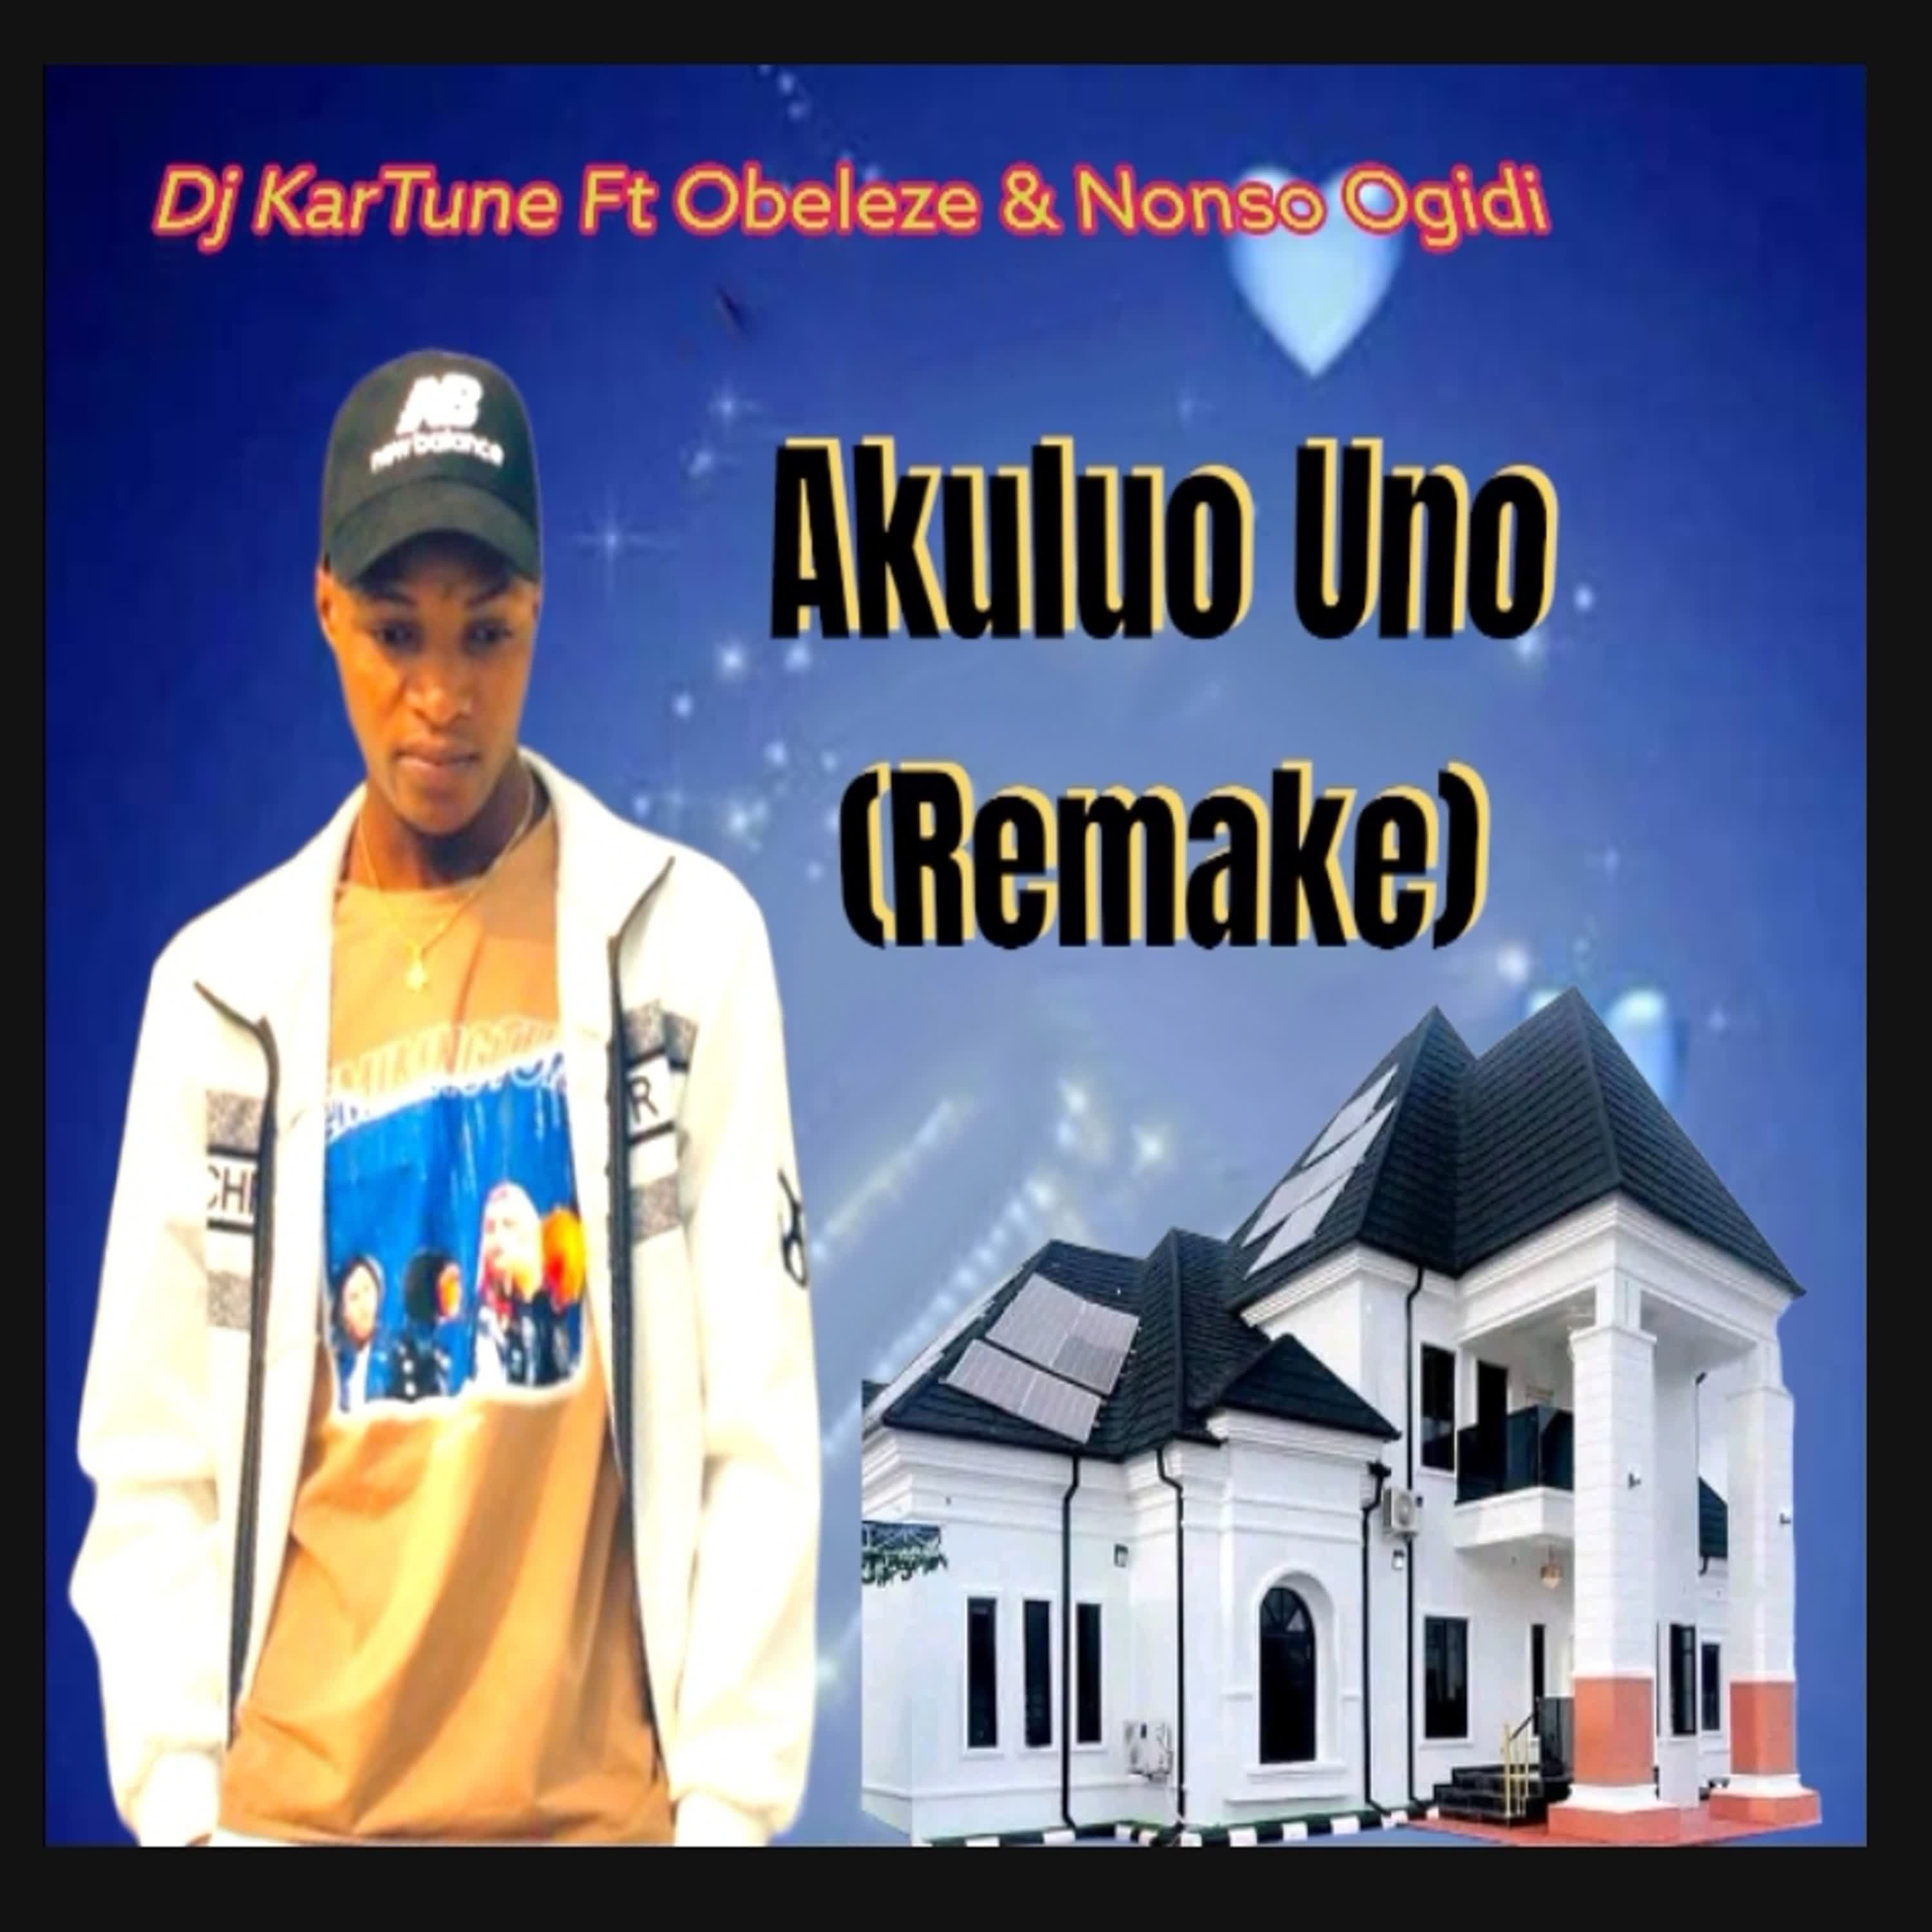 Akuluo Uno (Remake) Ft Obeleze, Nonso Ogidii